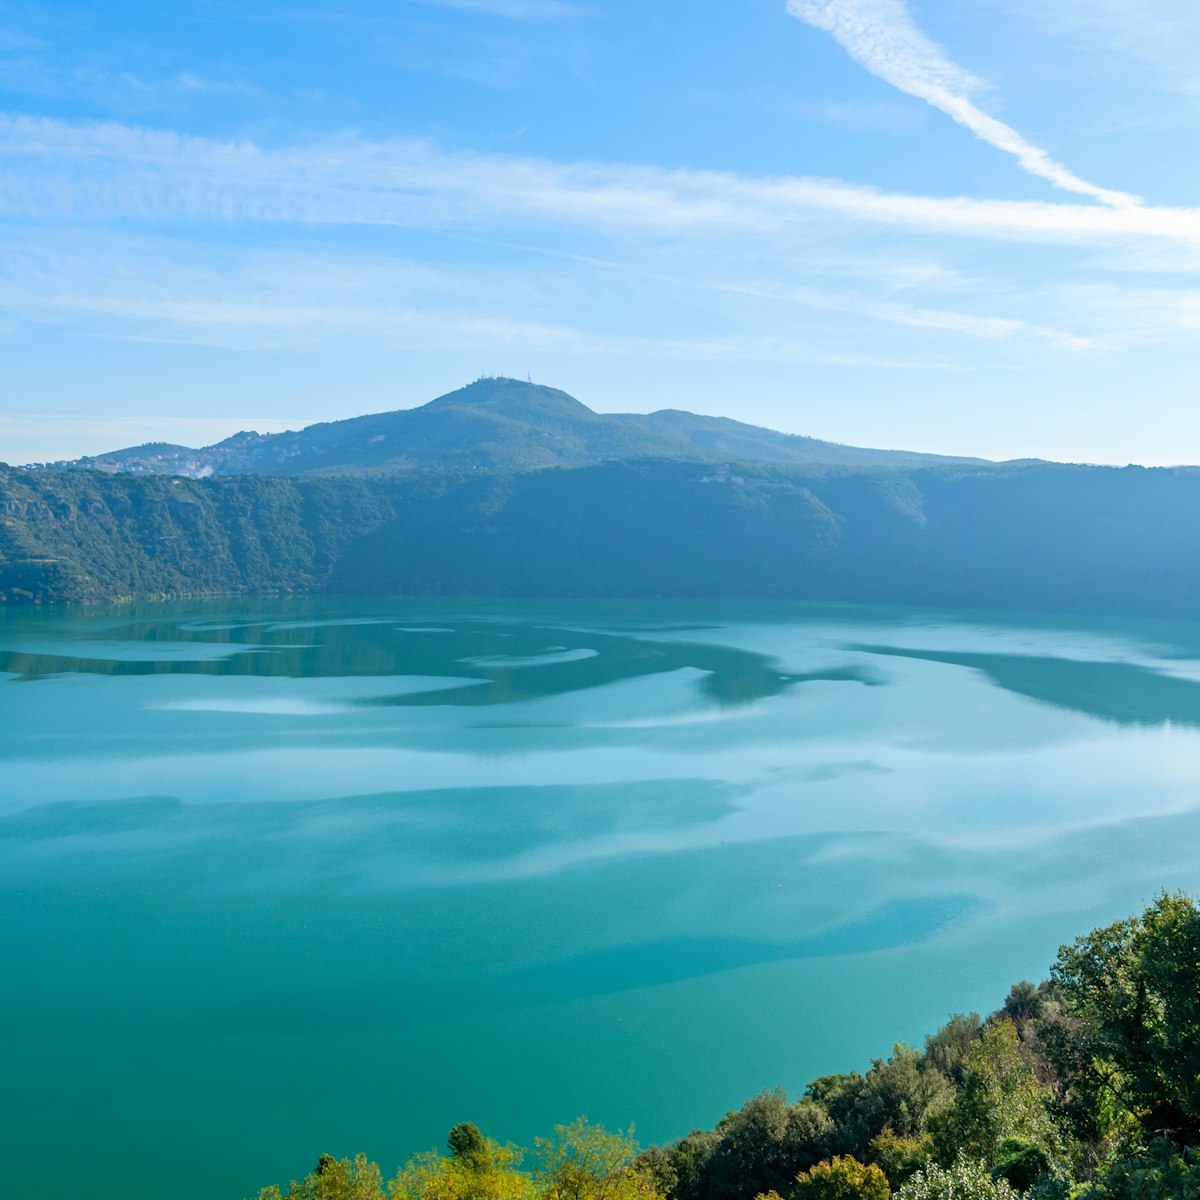 View of Lake Albano from the town of Castel Gandolfo in the Albano Hills.